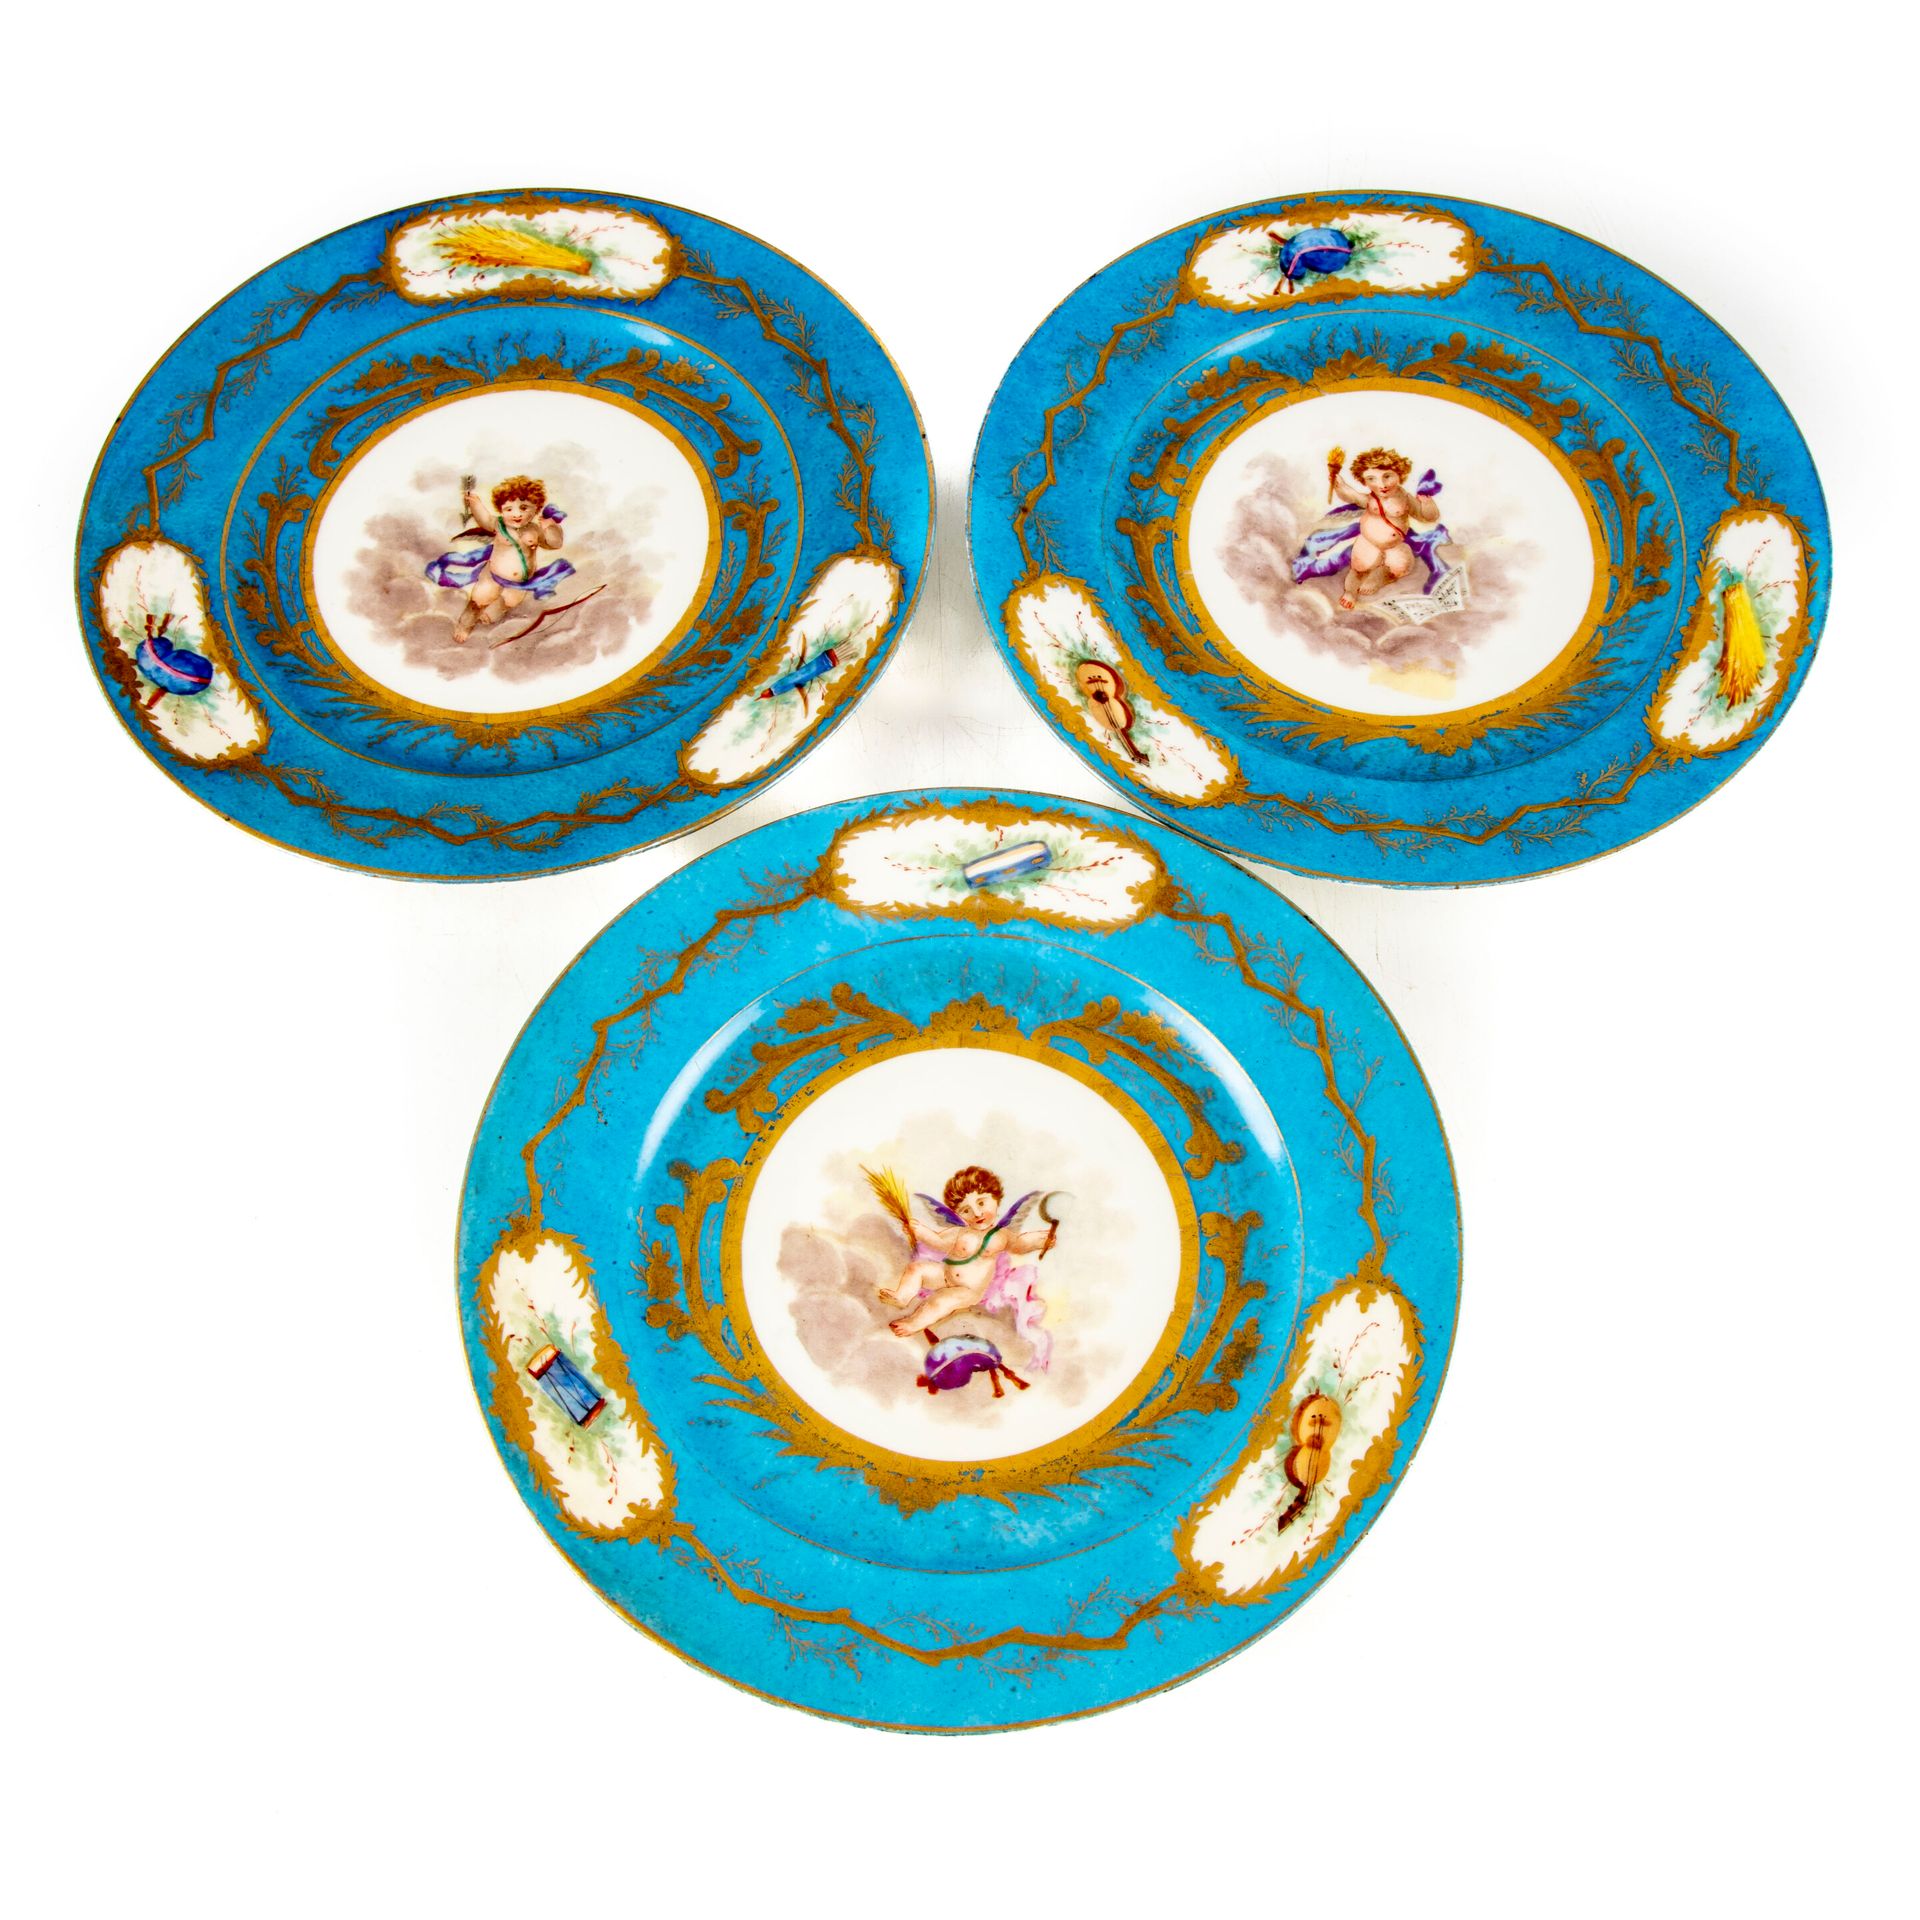 Null In the taste of the manufacture of Sevres
Set of three enamelled porcelain &hellip;